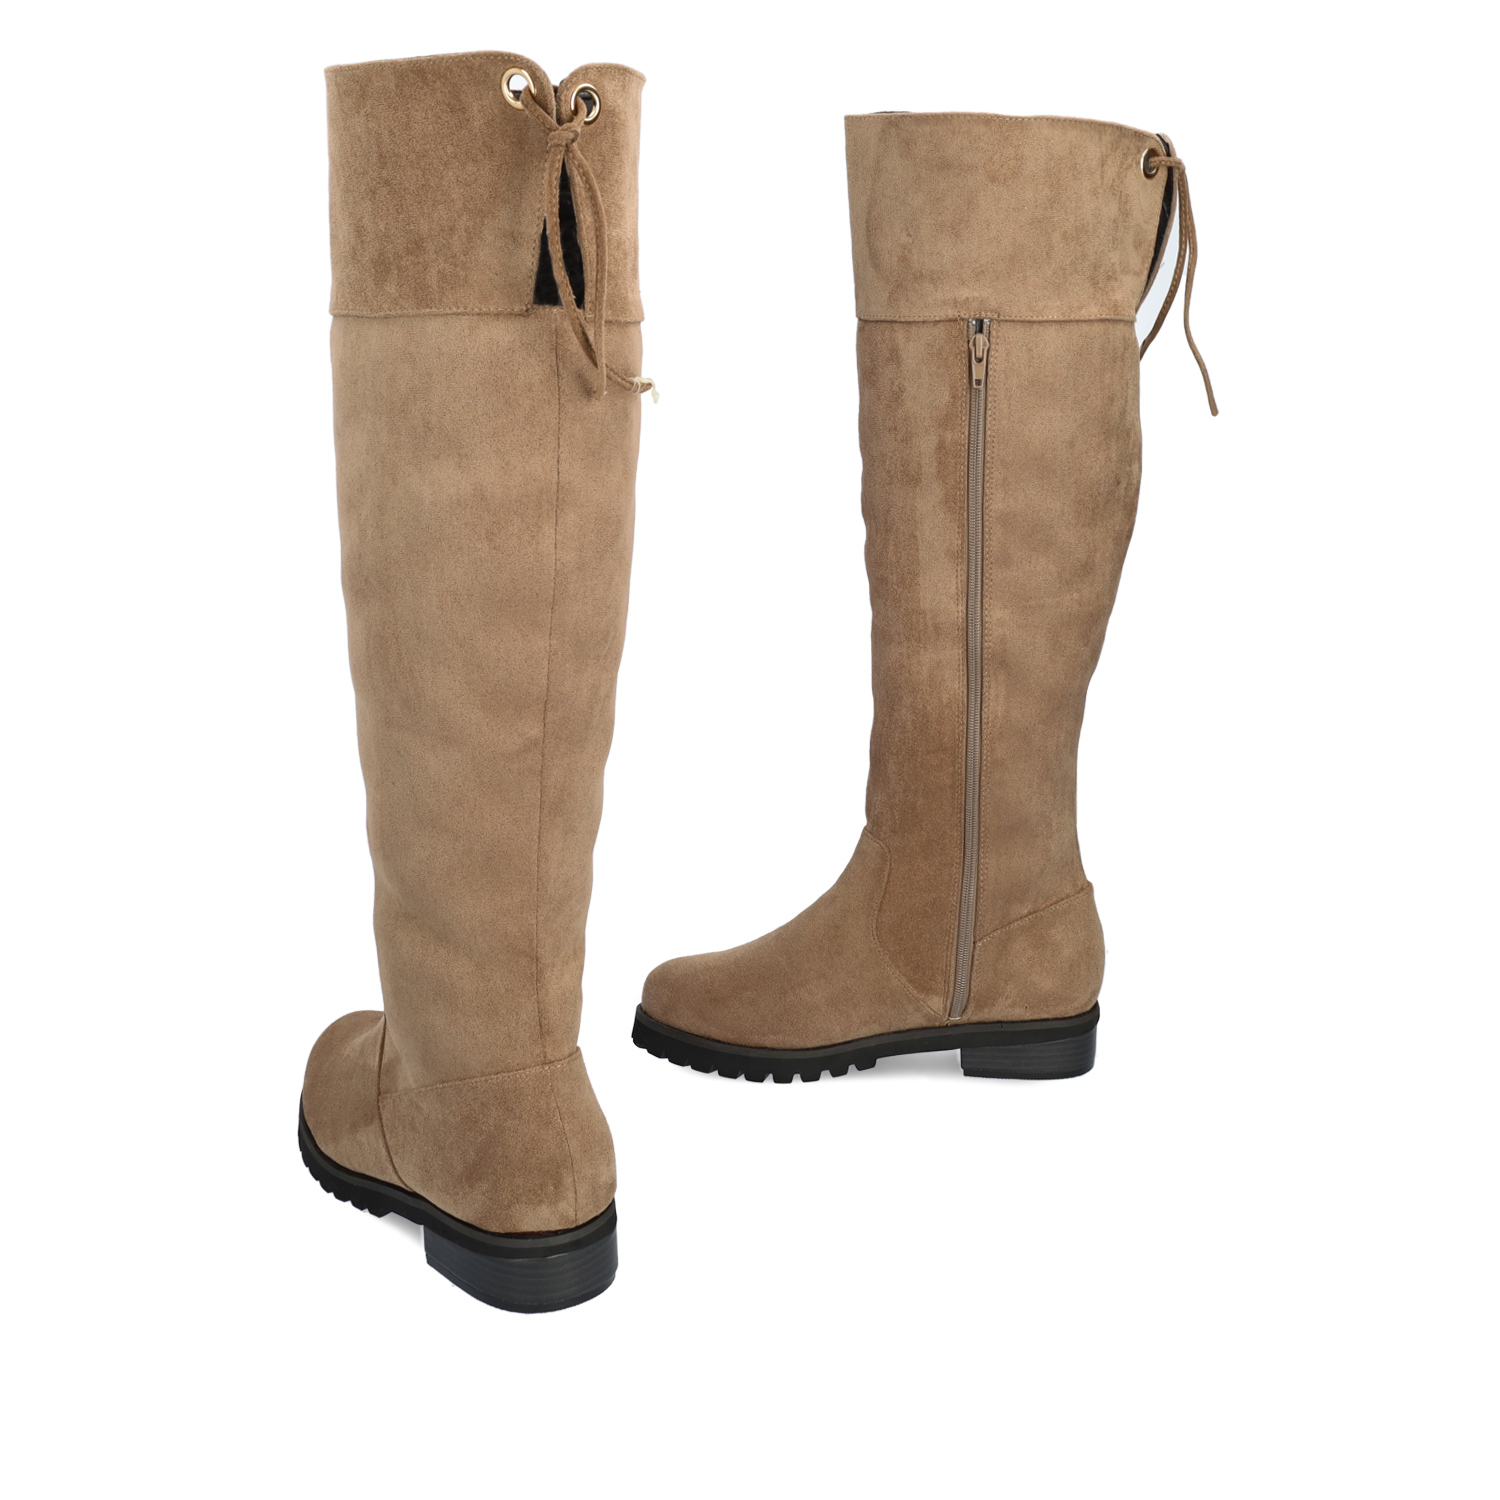 Knee-high boots in light brown faux suede 